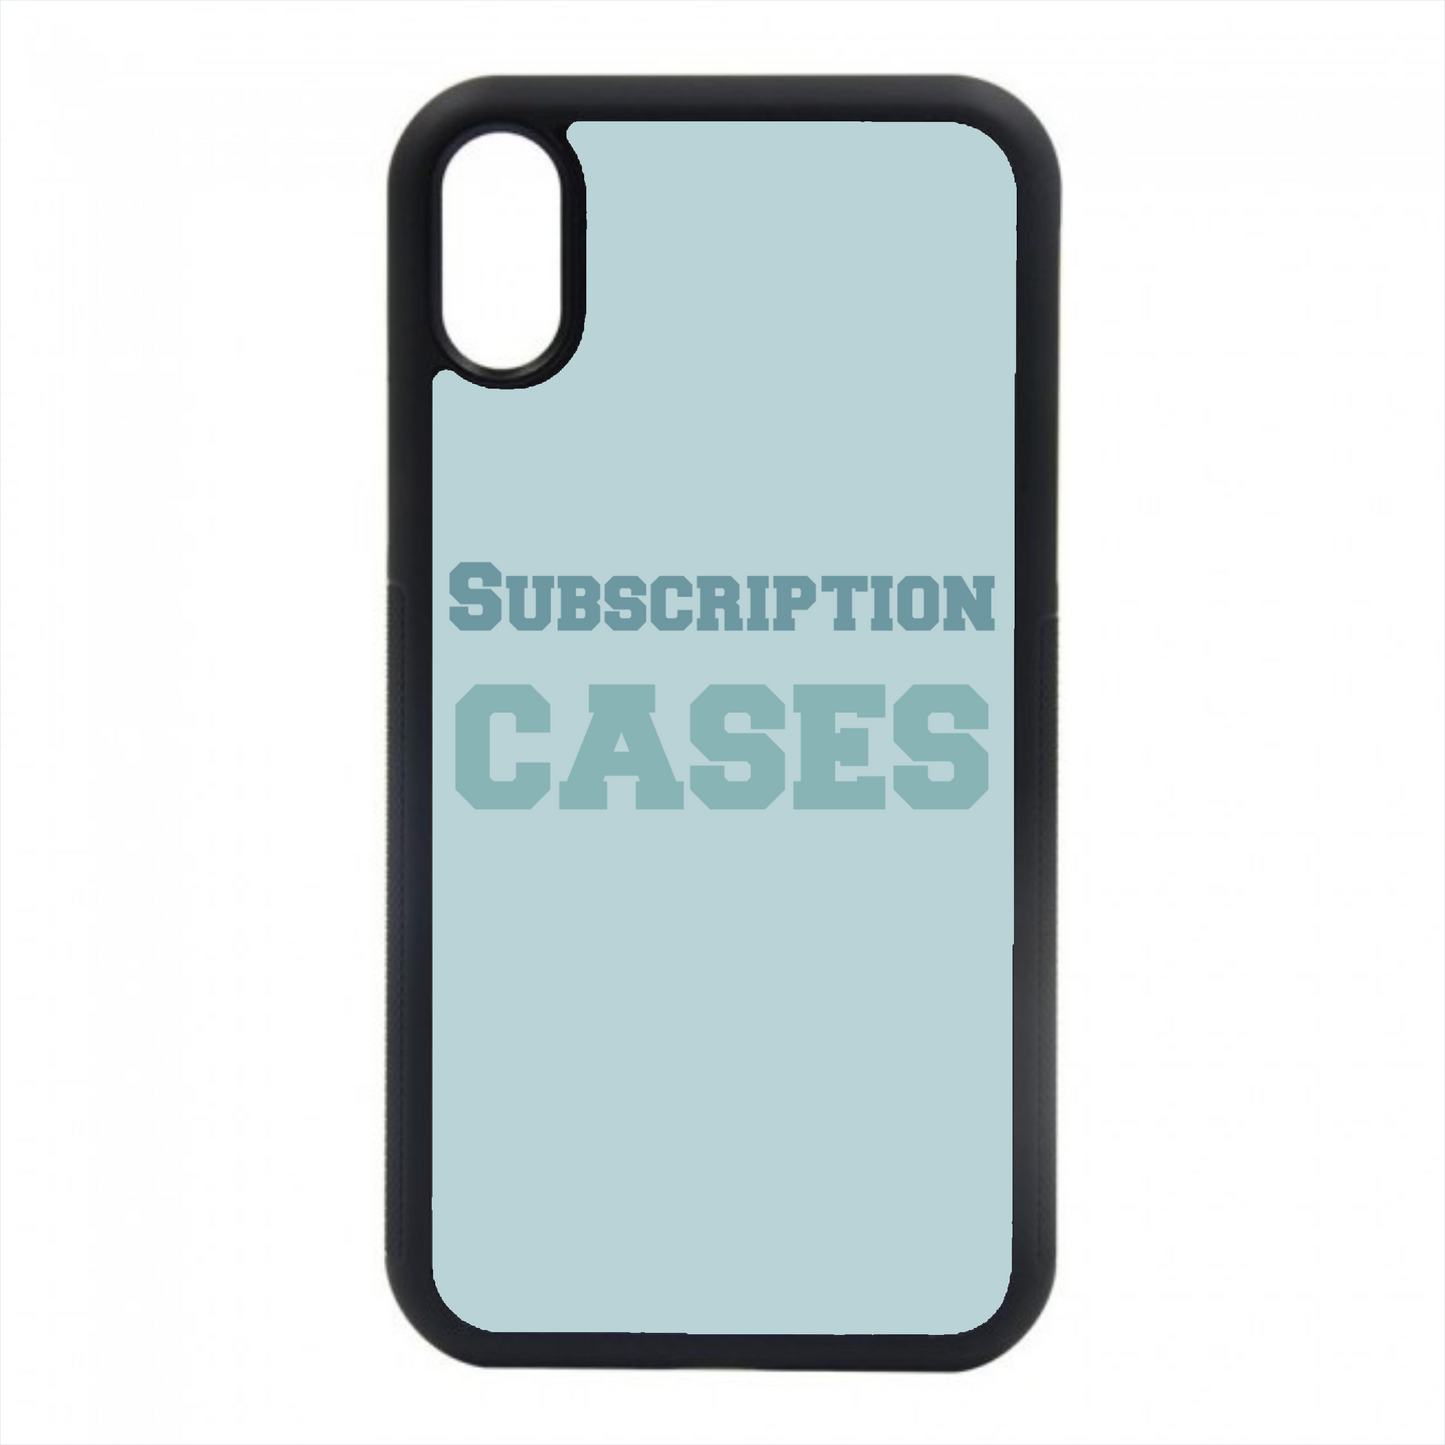 Subscription Cases - FREE SHIPPING